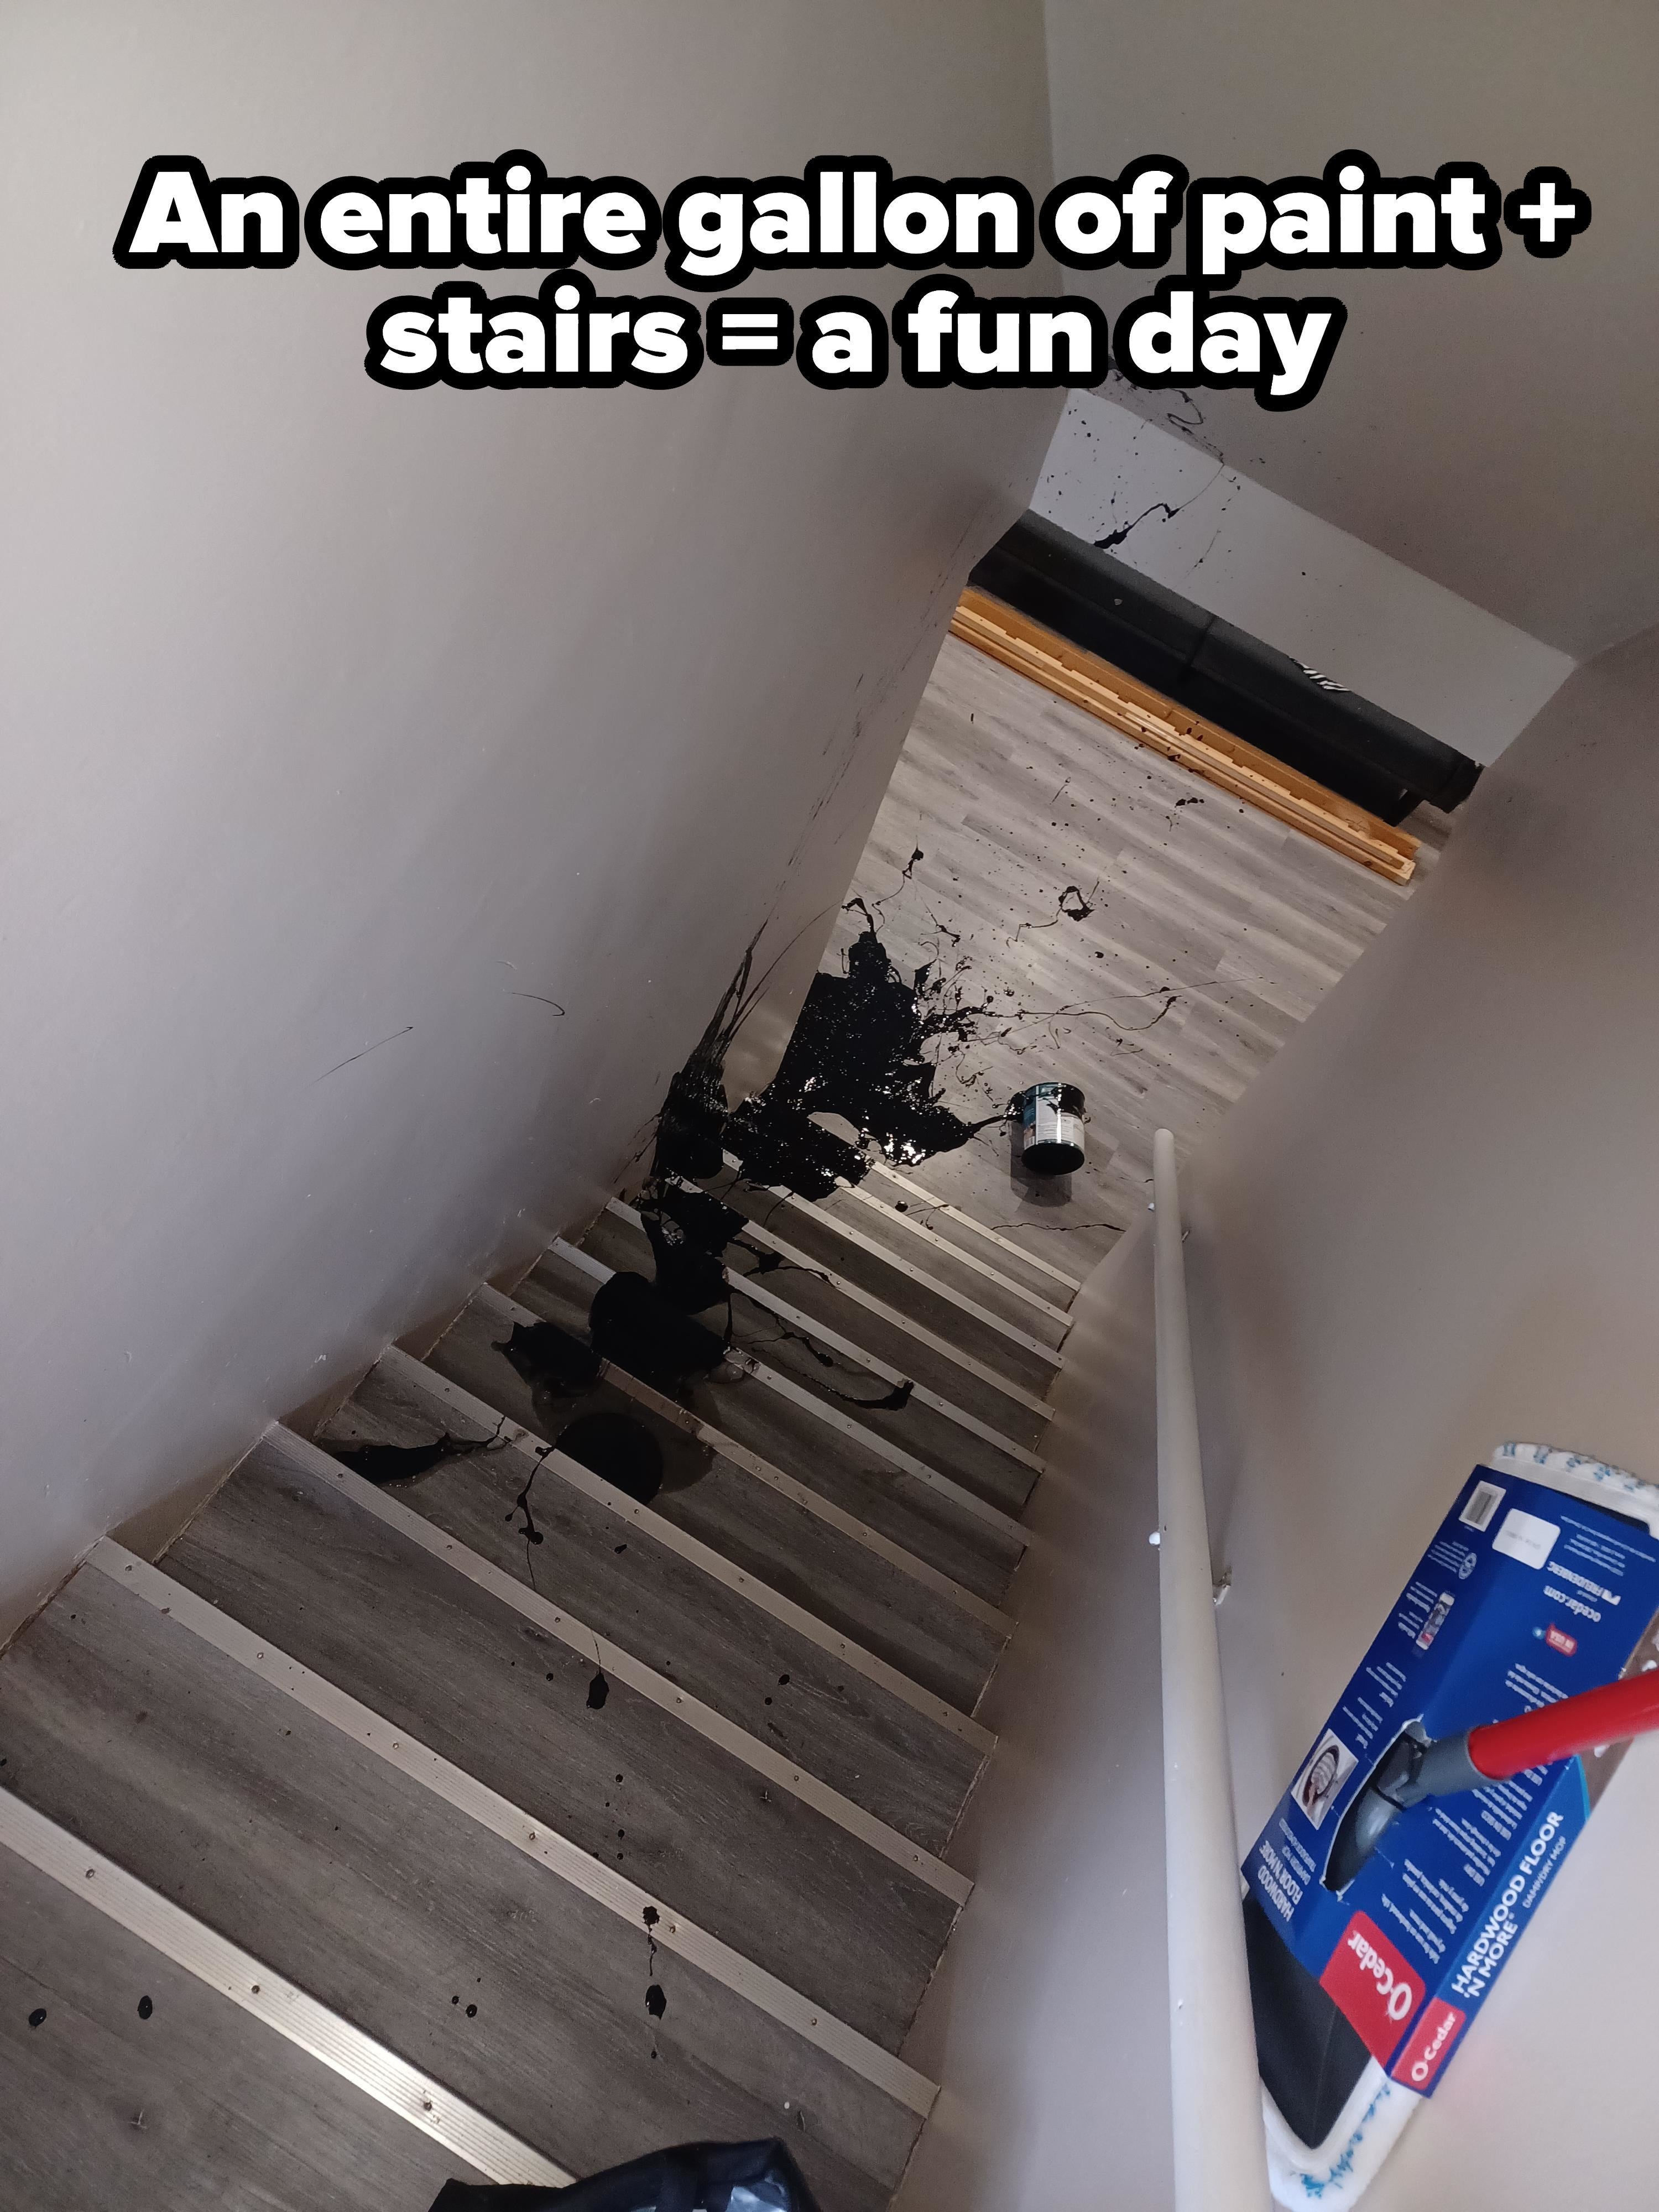 Paint spilled on stairs